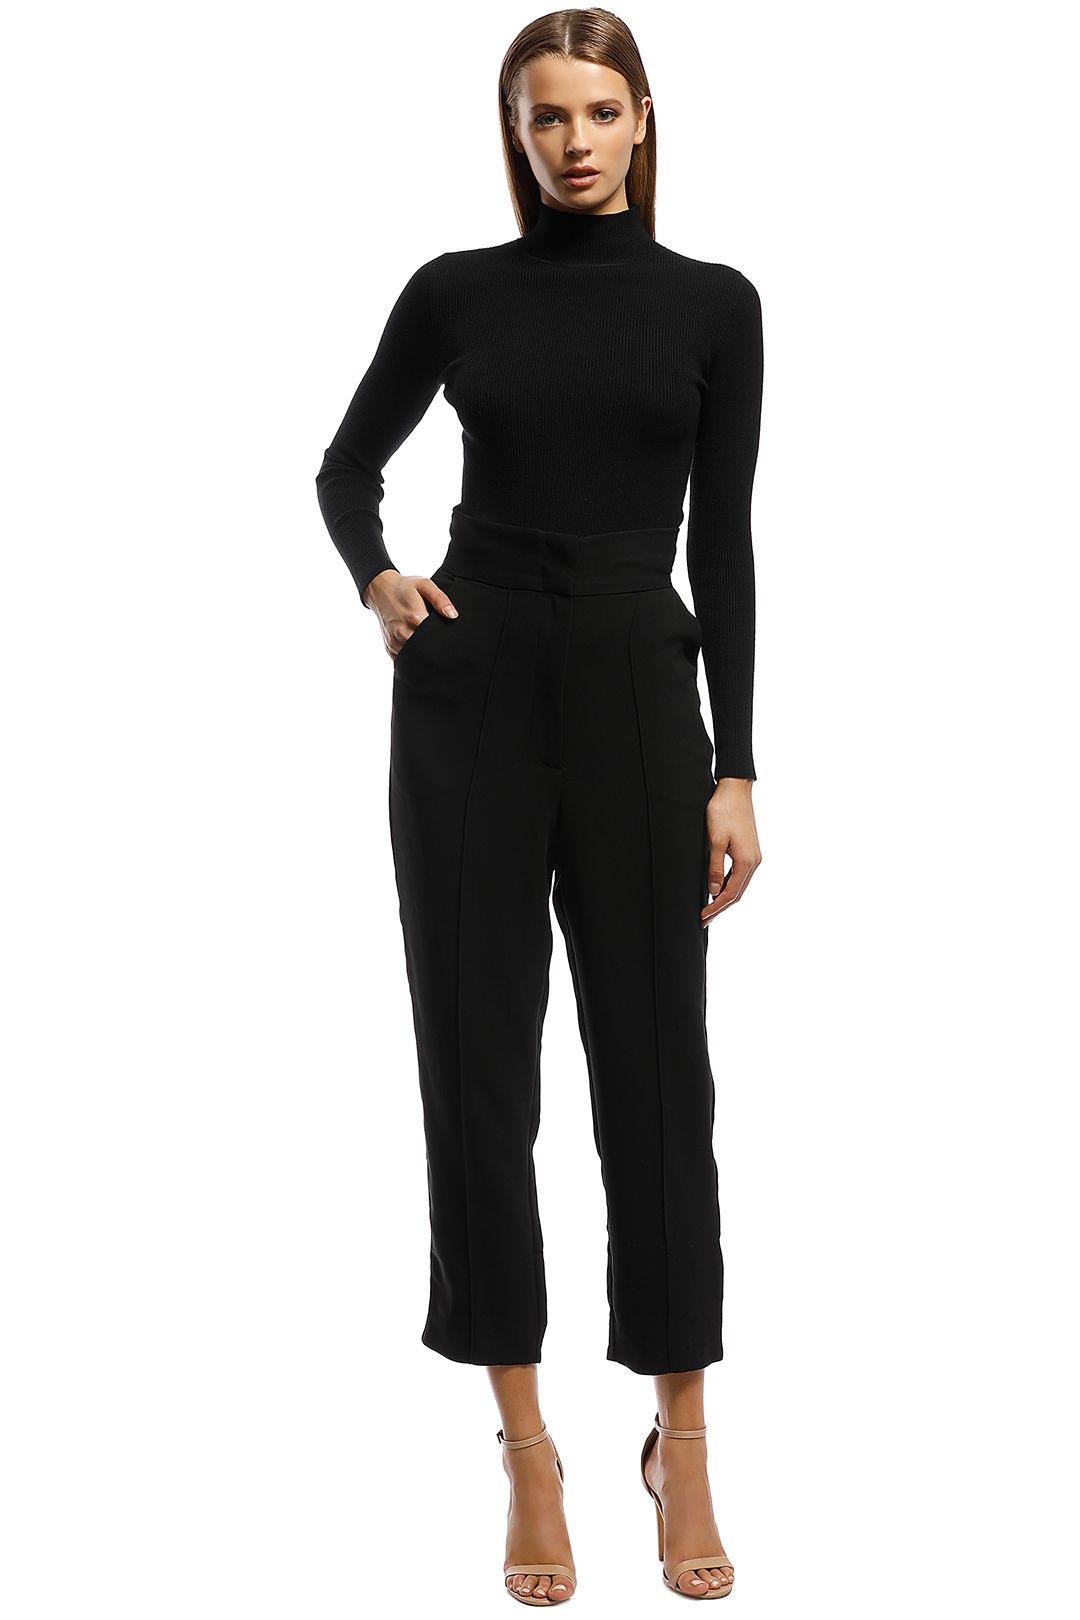 Keepsake The Label - The Fall Pant - Black - Front